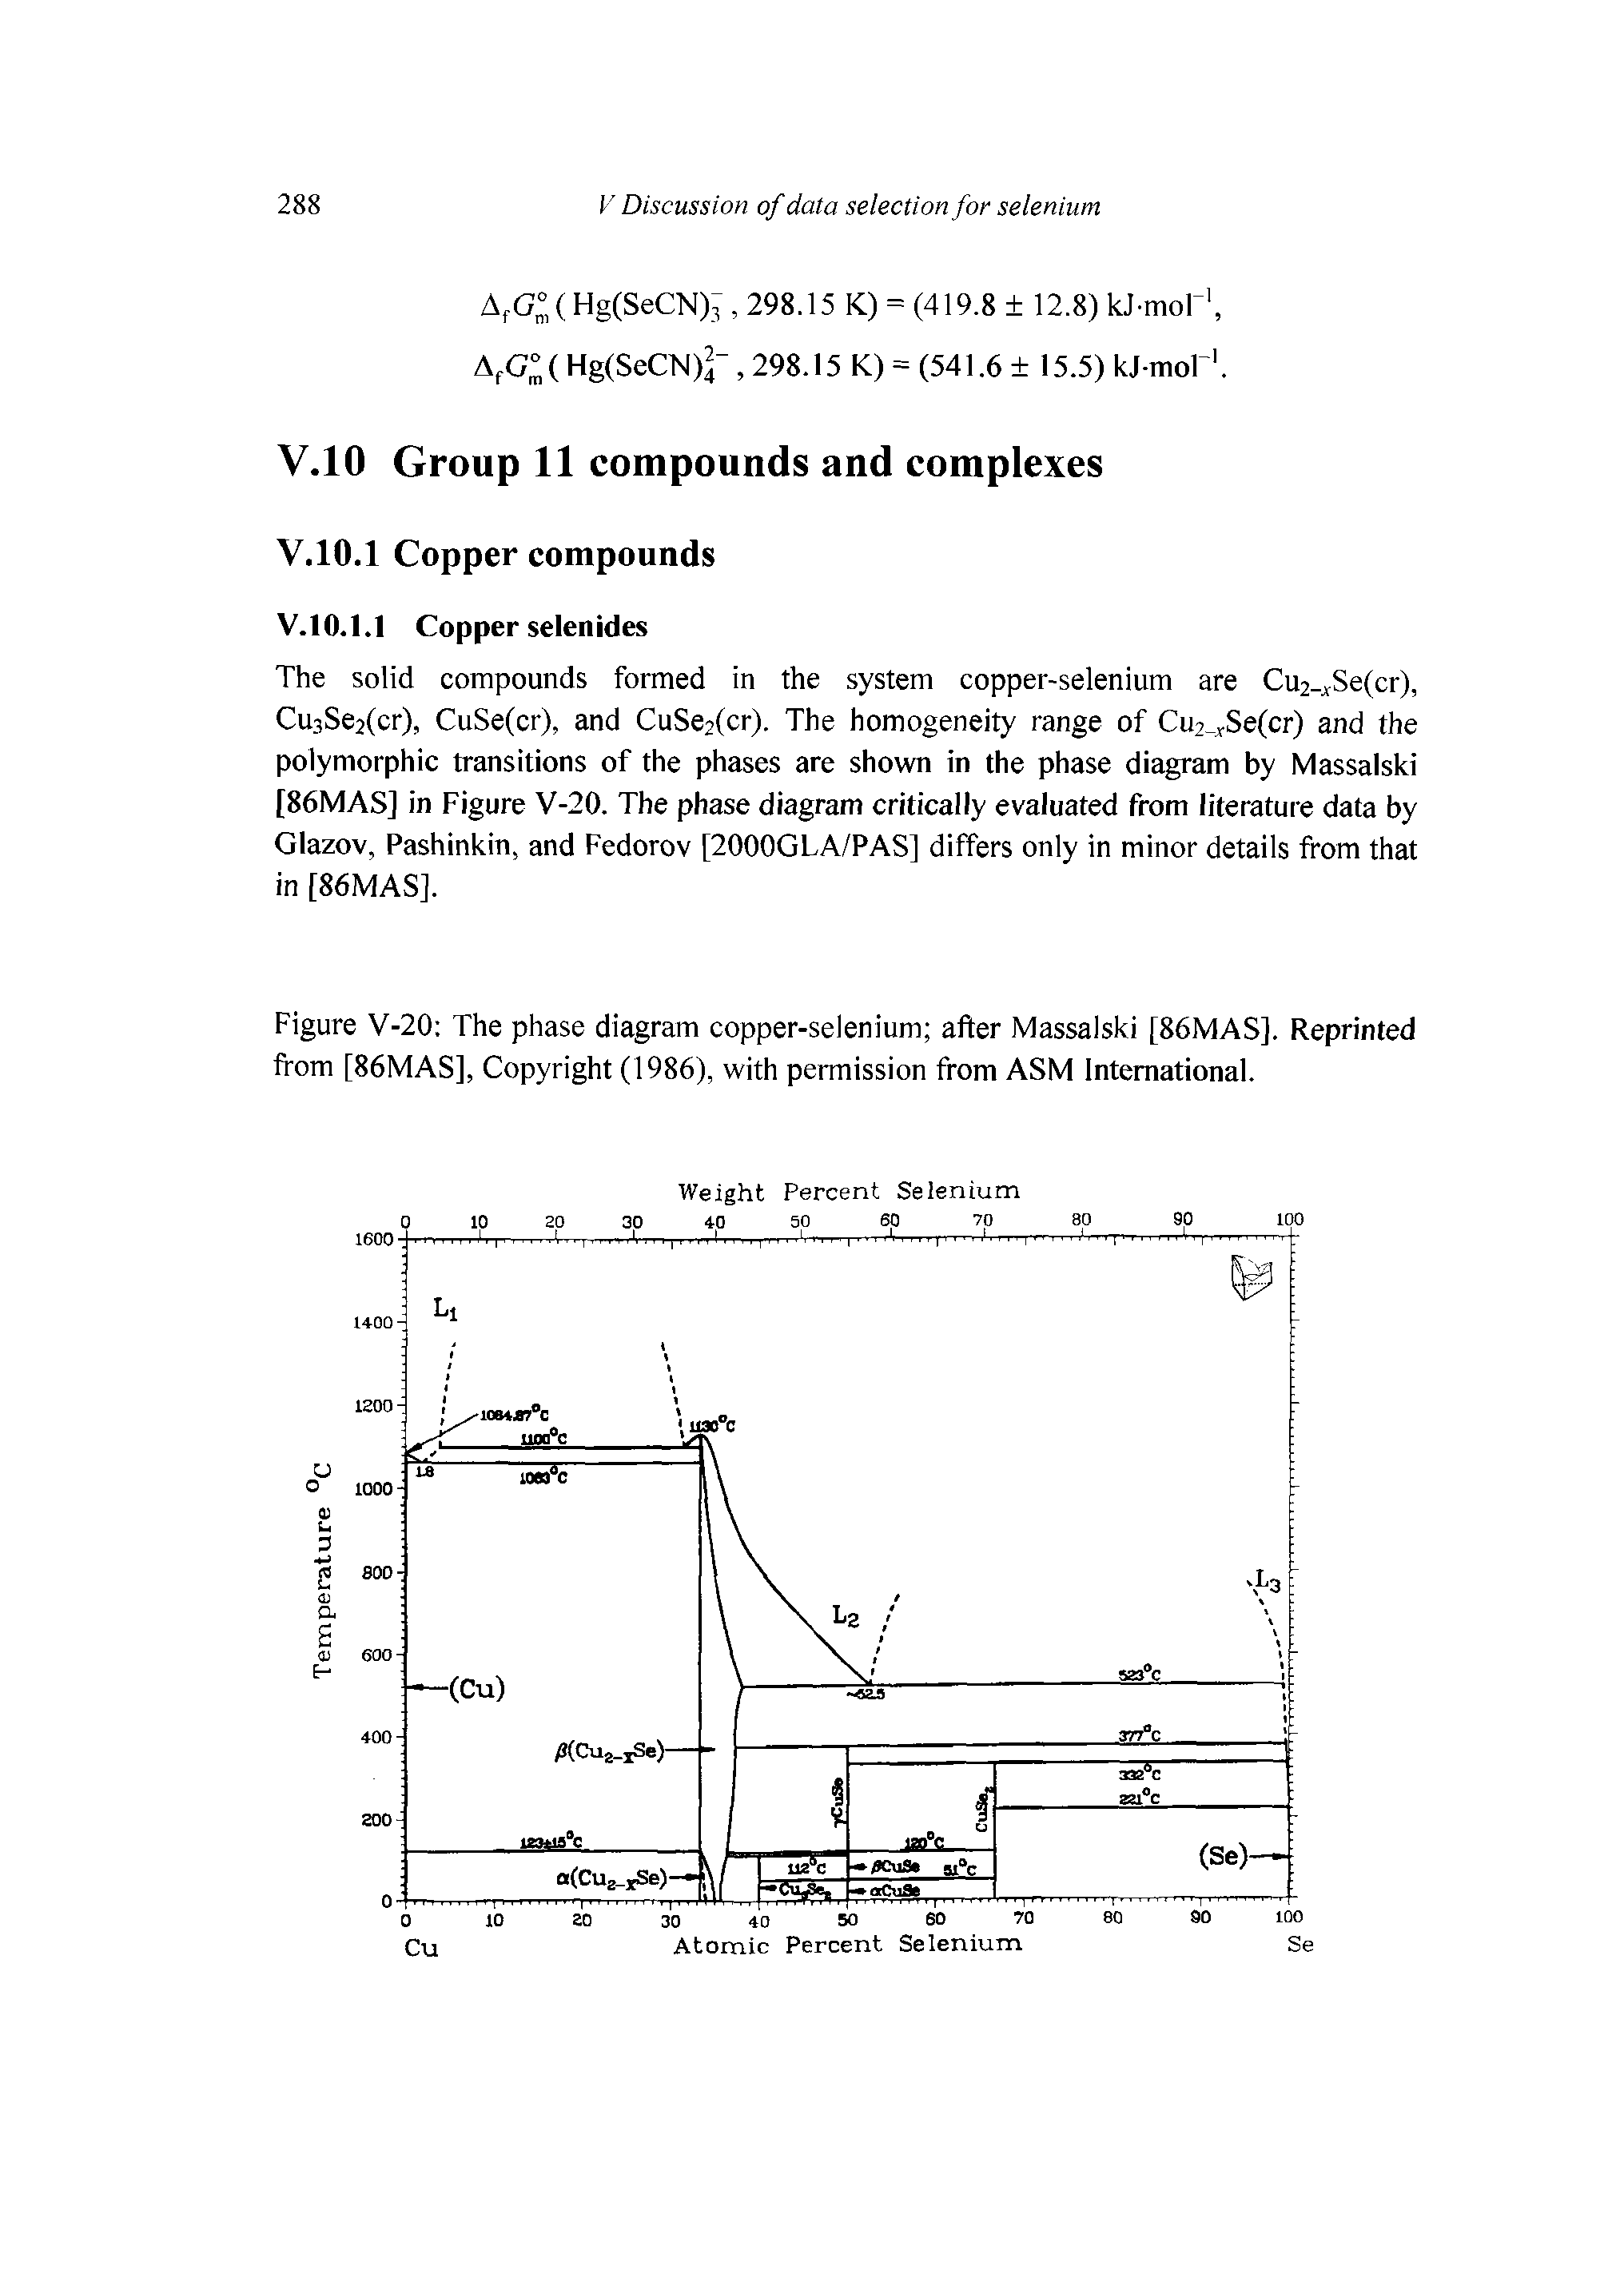 Figure V-20 The phase diagram copper-selenium after Massalski [86MAS]. Reprinted from [86MAS], Copyright (1986), with permission from ASM International.